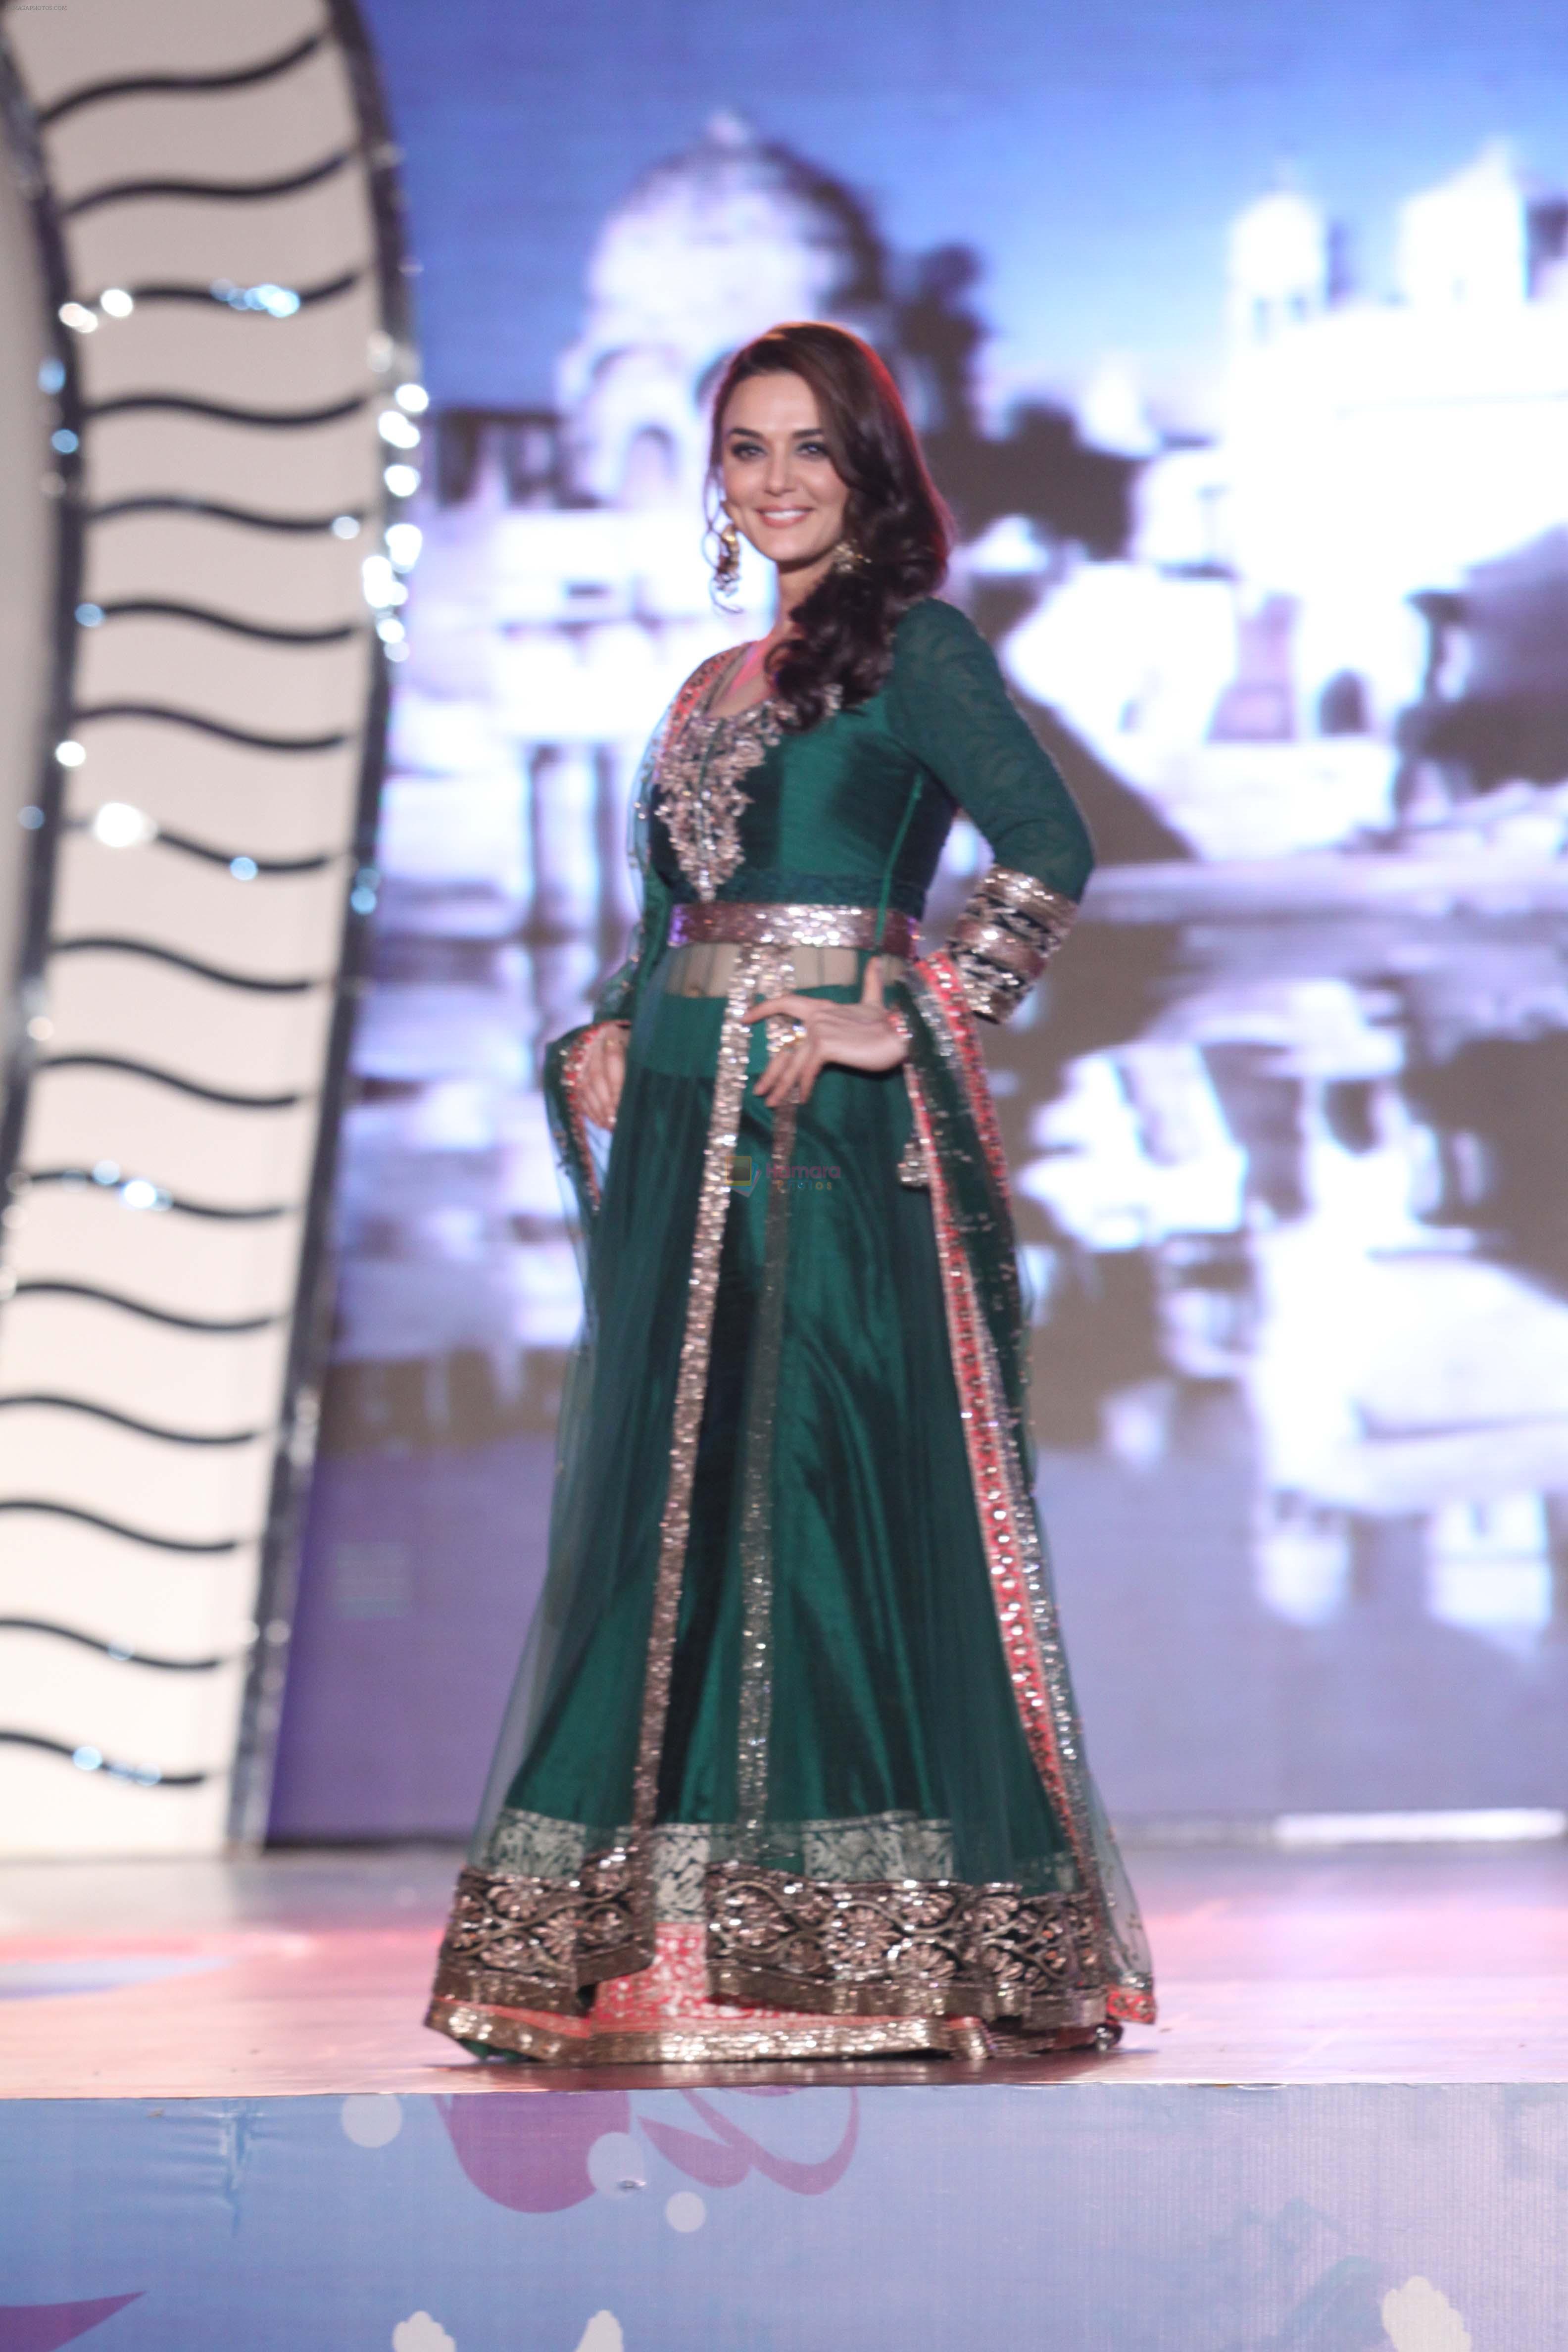 Preity Zinta at Manish malhotra show for save n empower the girl child cause by lilavati hospital in Mumbai on 5th Feb 2014